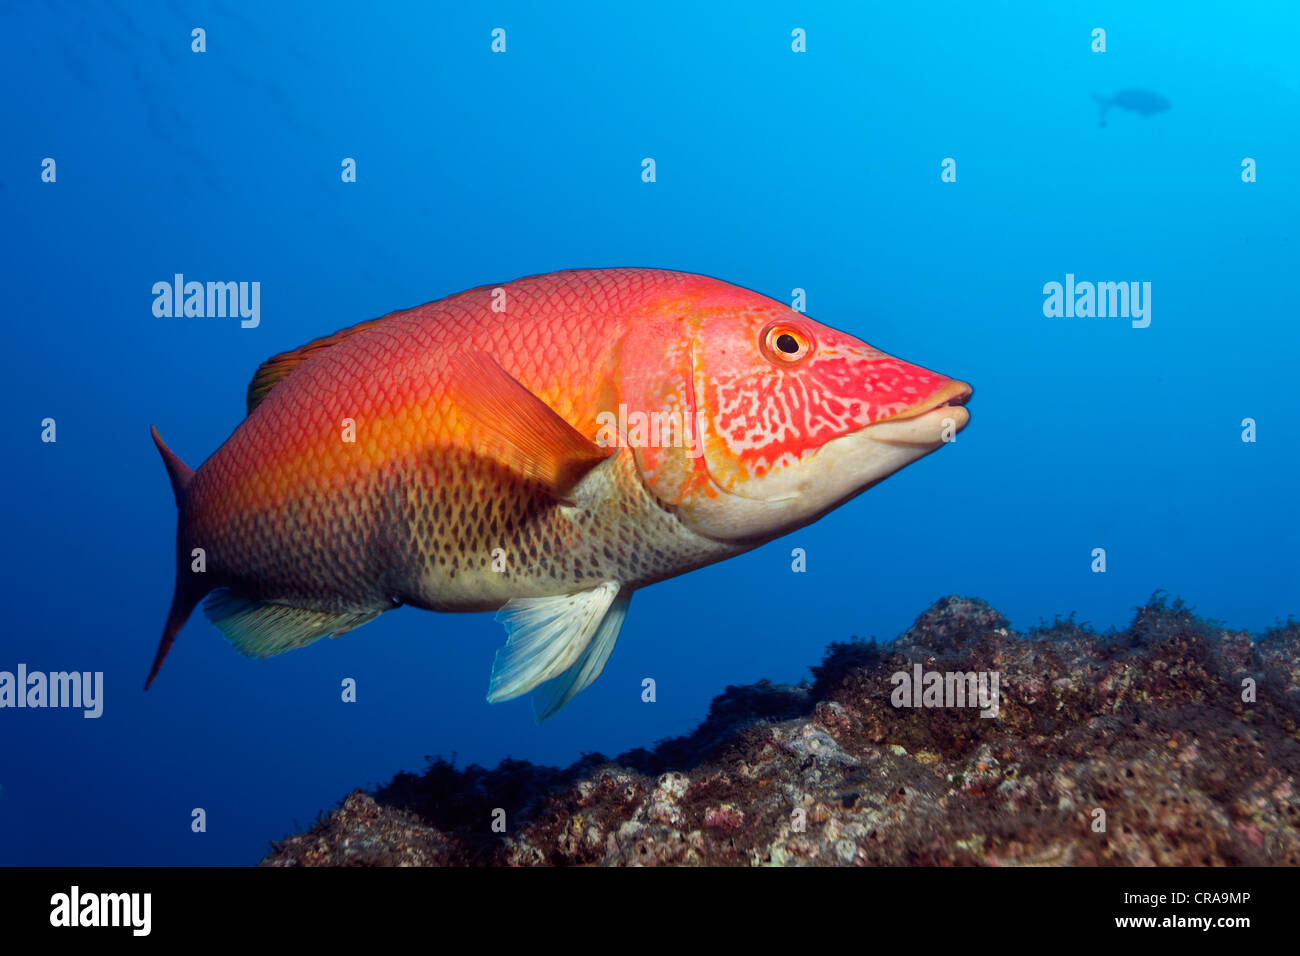 Red Hogfish (Bodianus scrofa), male, above overcrusted rock, Madeira, Portugal, Europe, Atlantic Ocean Stock Photo